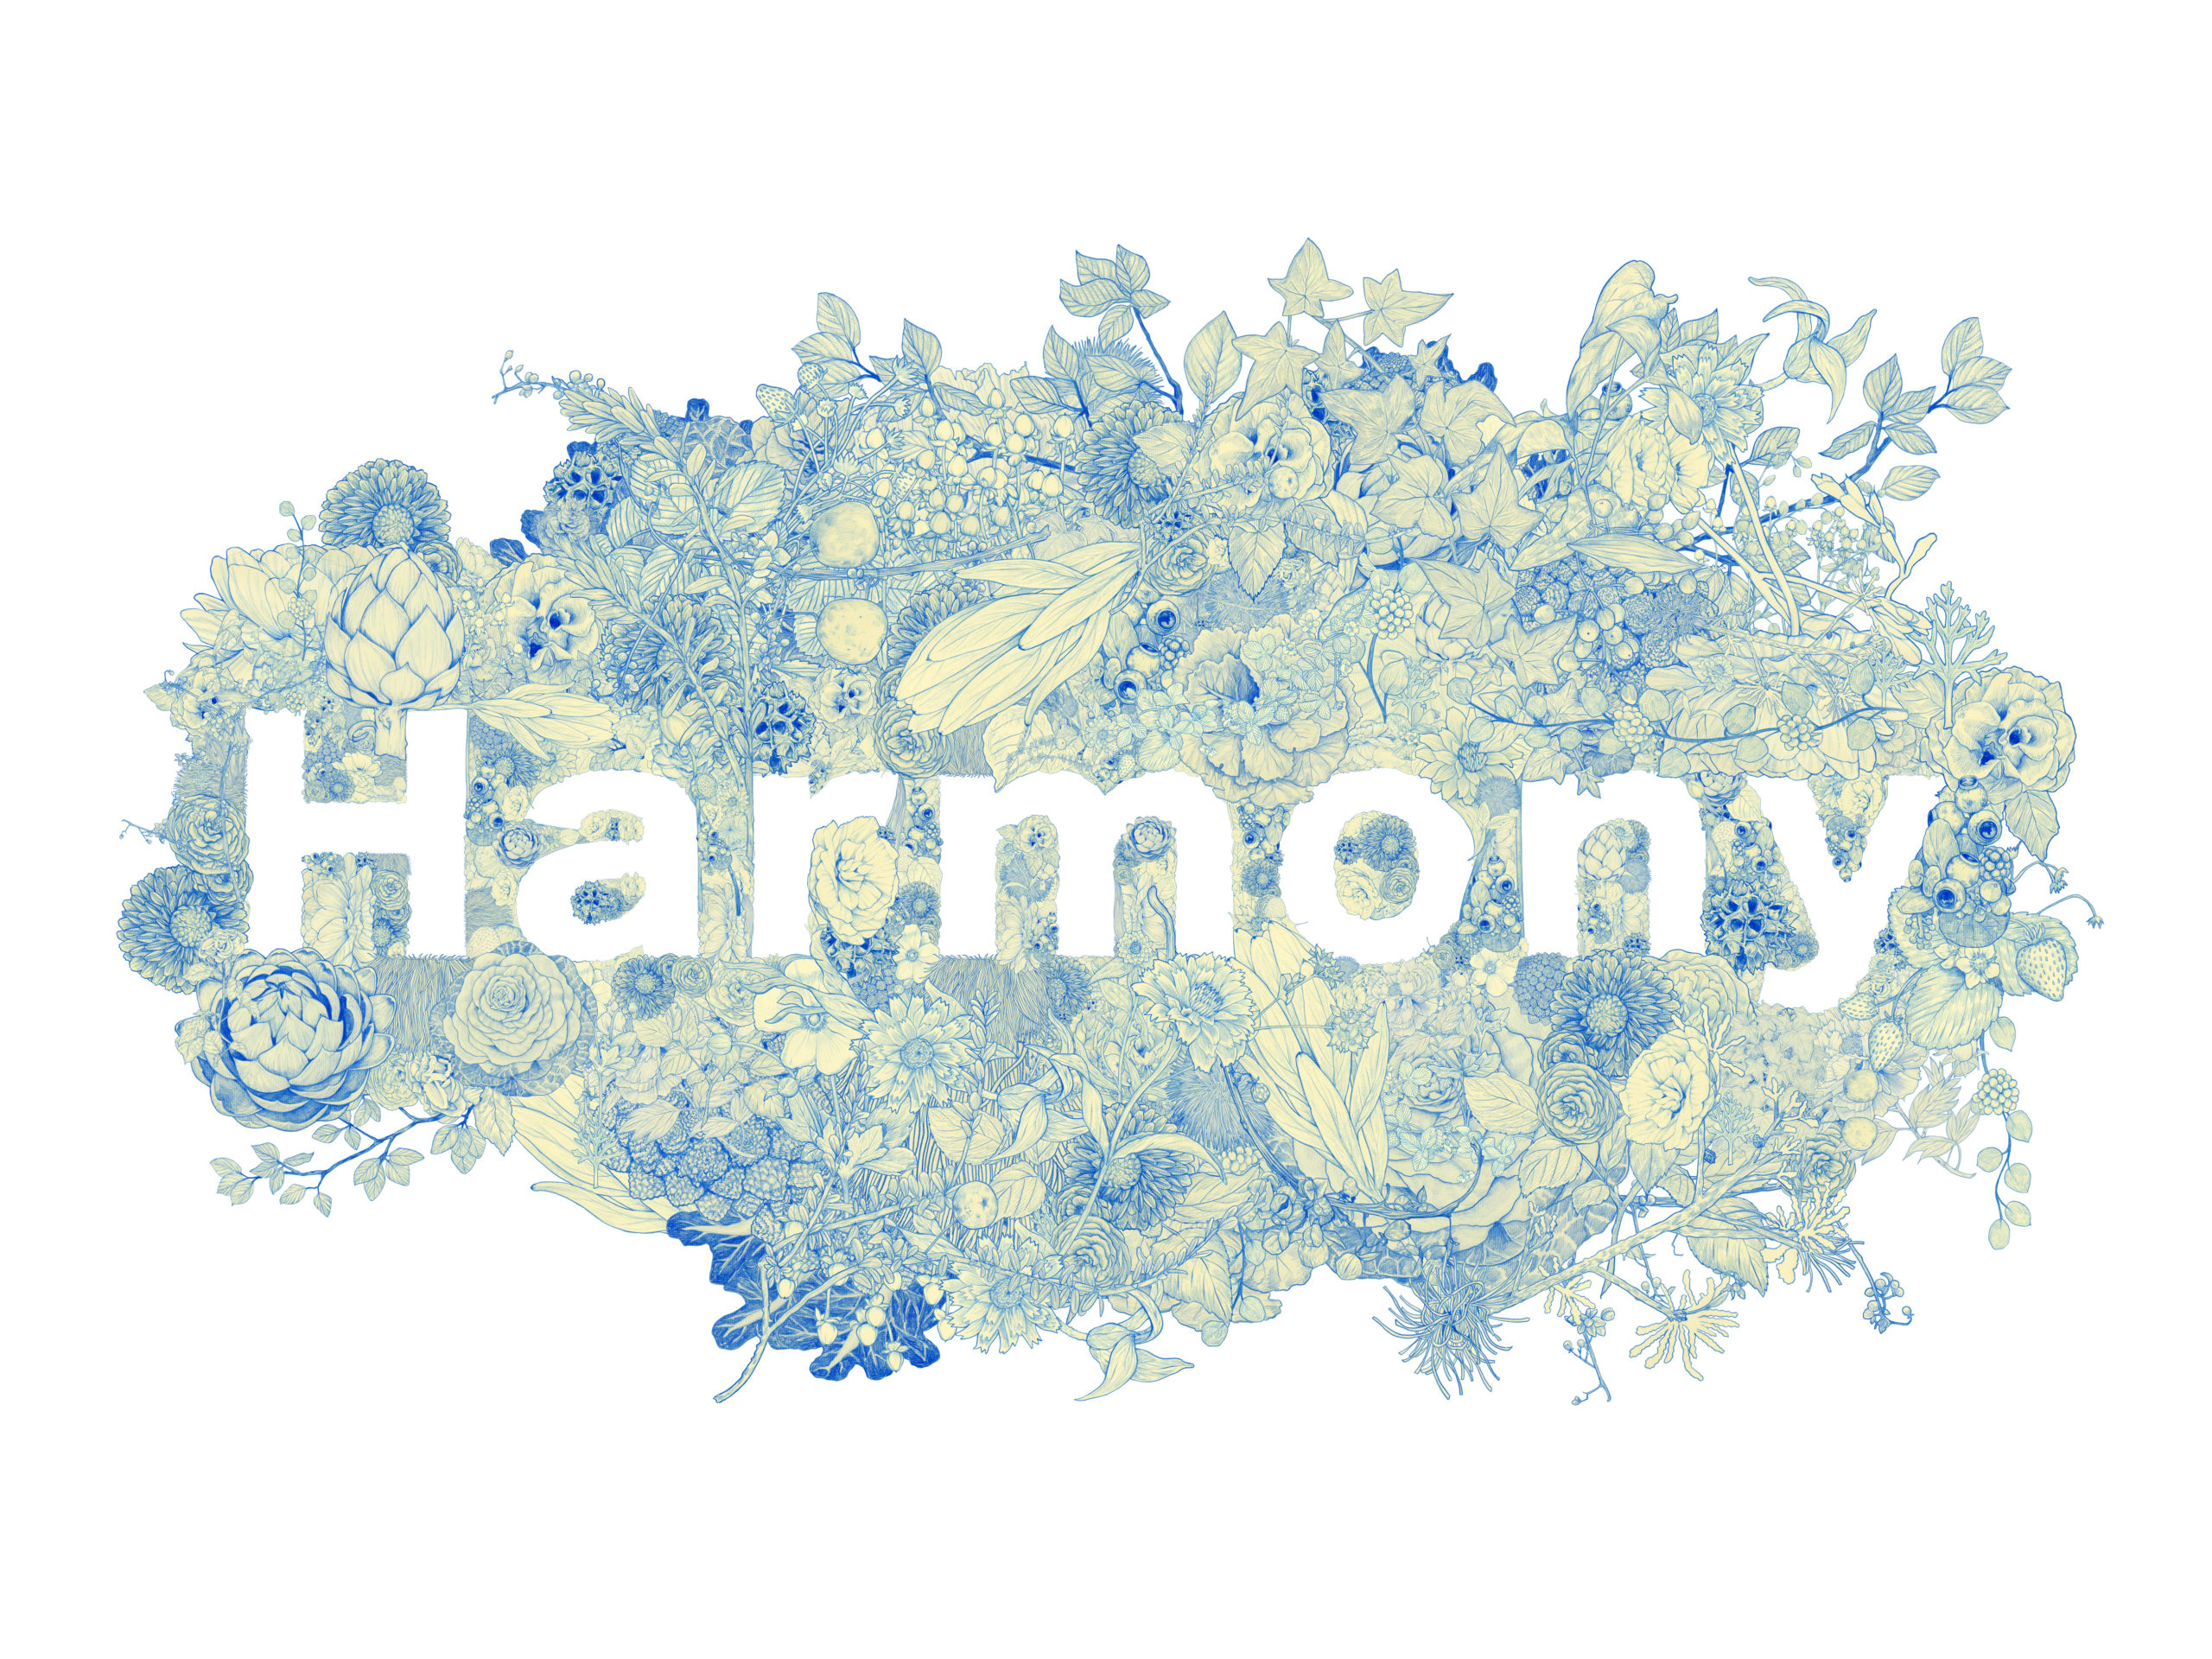 Harmony 1 ”あたまのうえで浮遊する” ／ 1455✖️ 897mm／for solo show『Harmony ／my melody , your melody』at hpgrp gallery Tokyo Aoyama